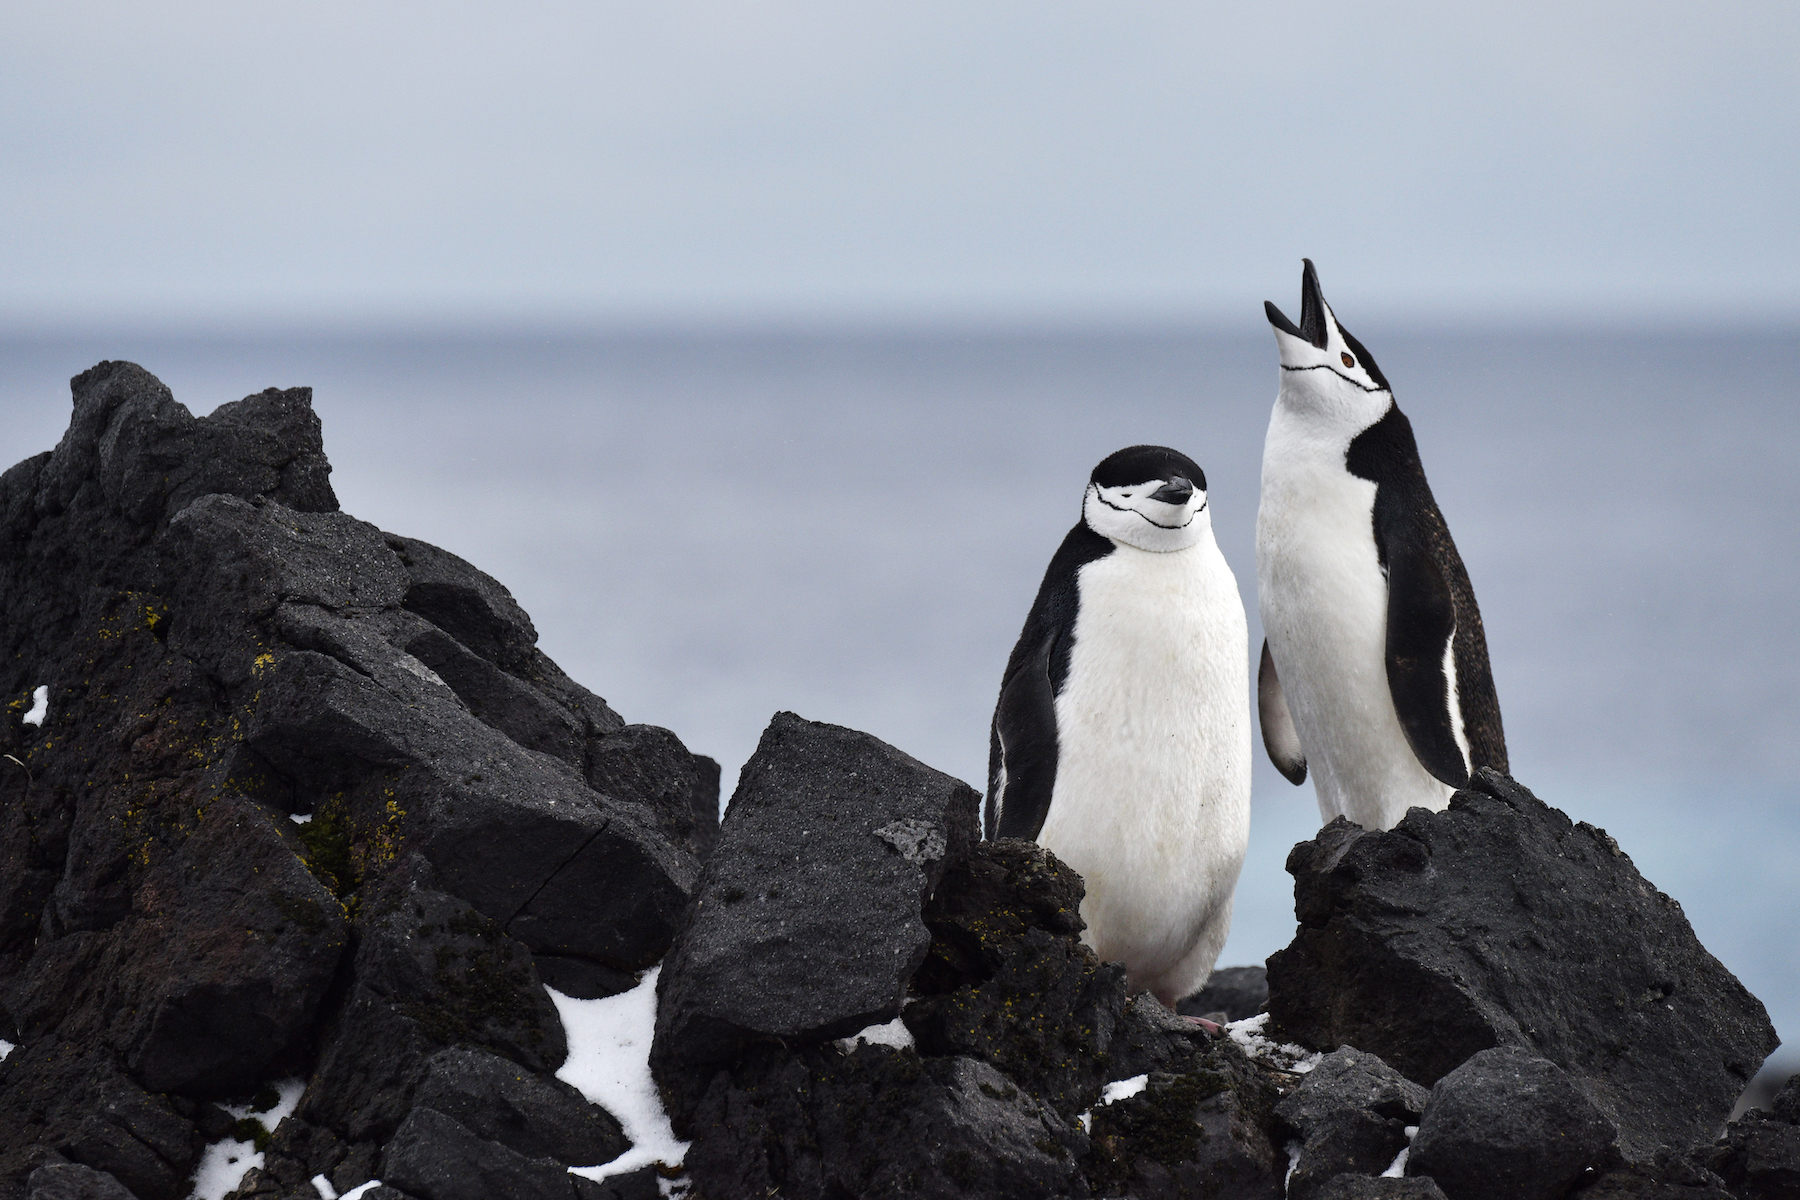 Two penguins on black rocks; left penguin is standing at rest and right penguin is calling.